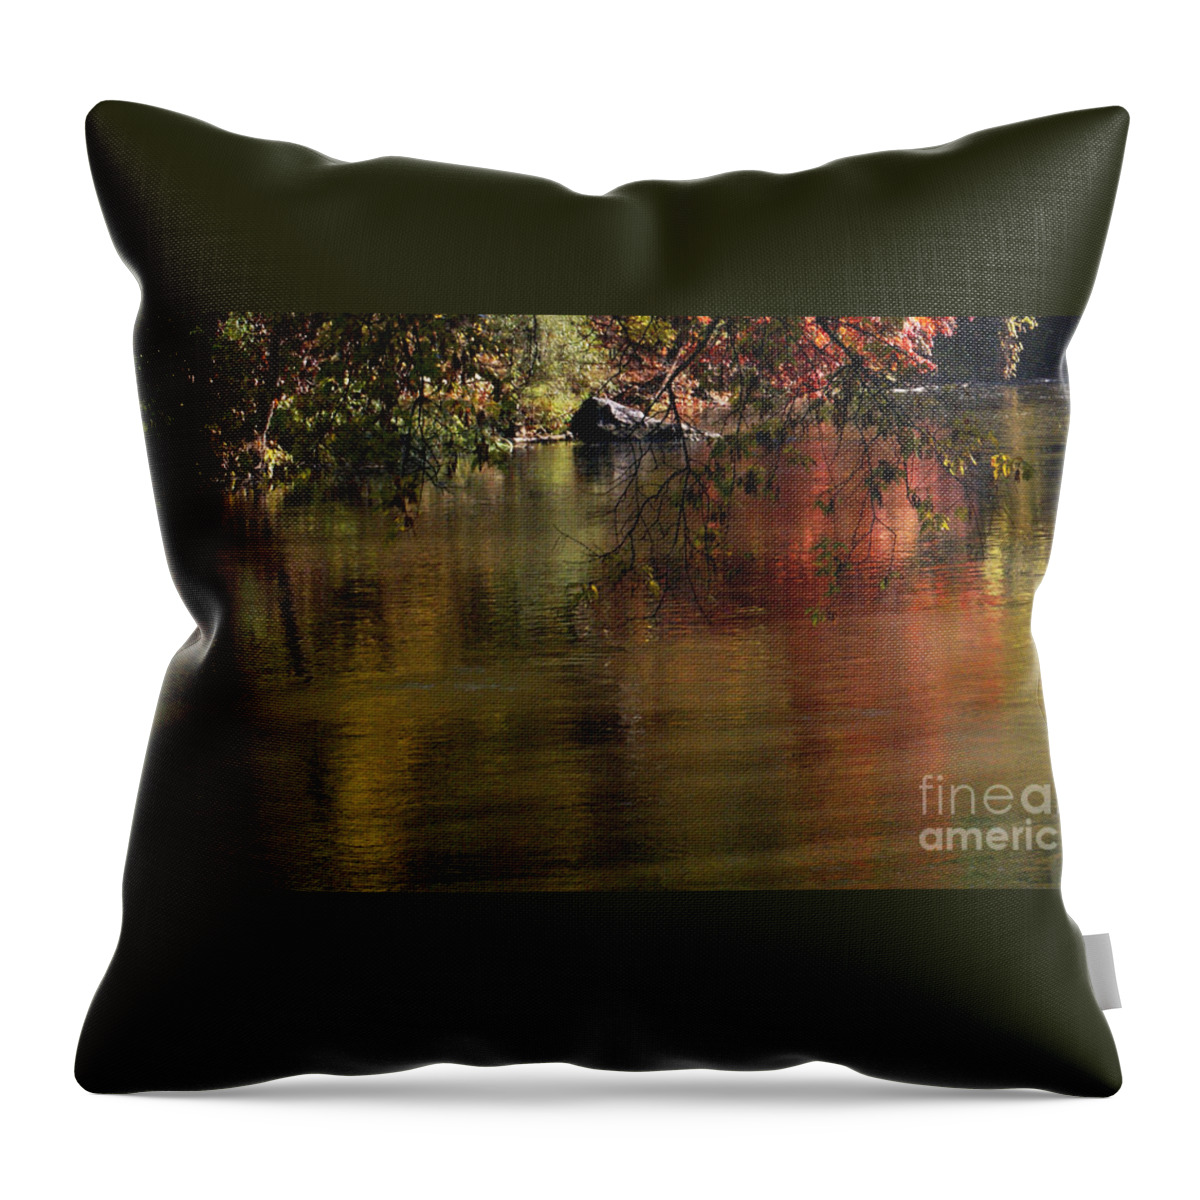 River Throw Pillow featuring the photograph Calm Reflection by Linda Shafer